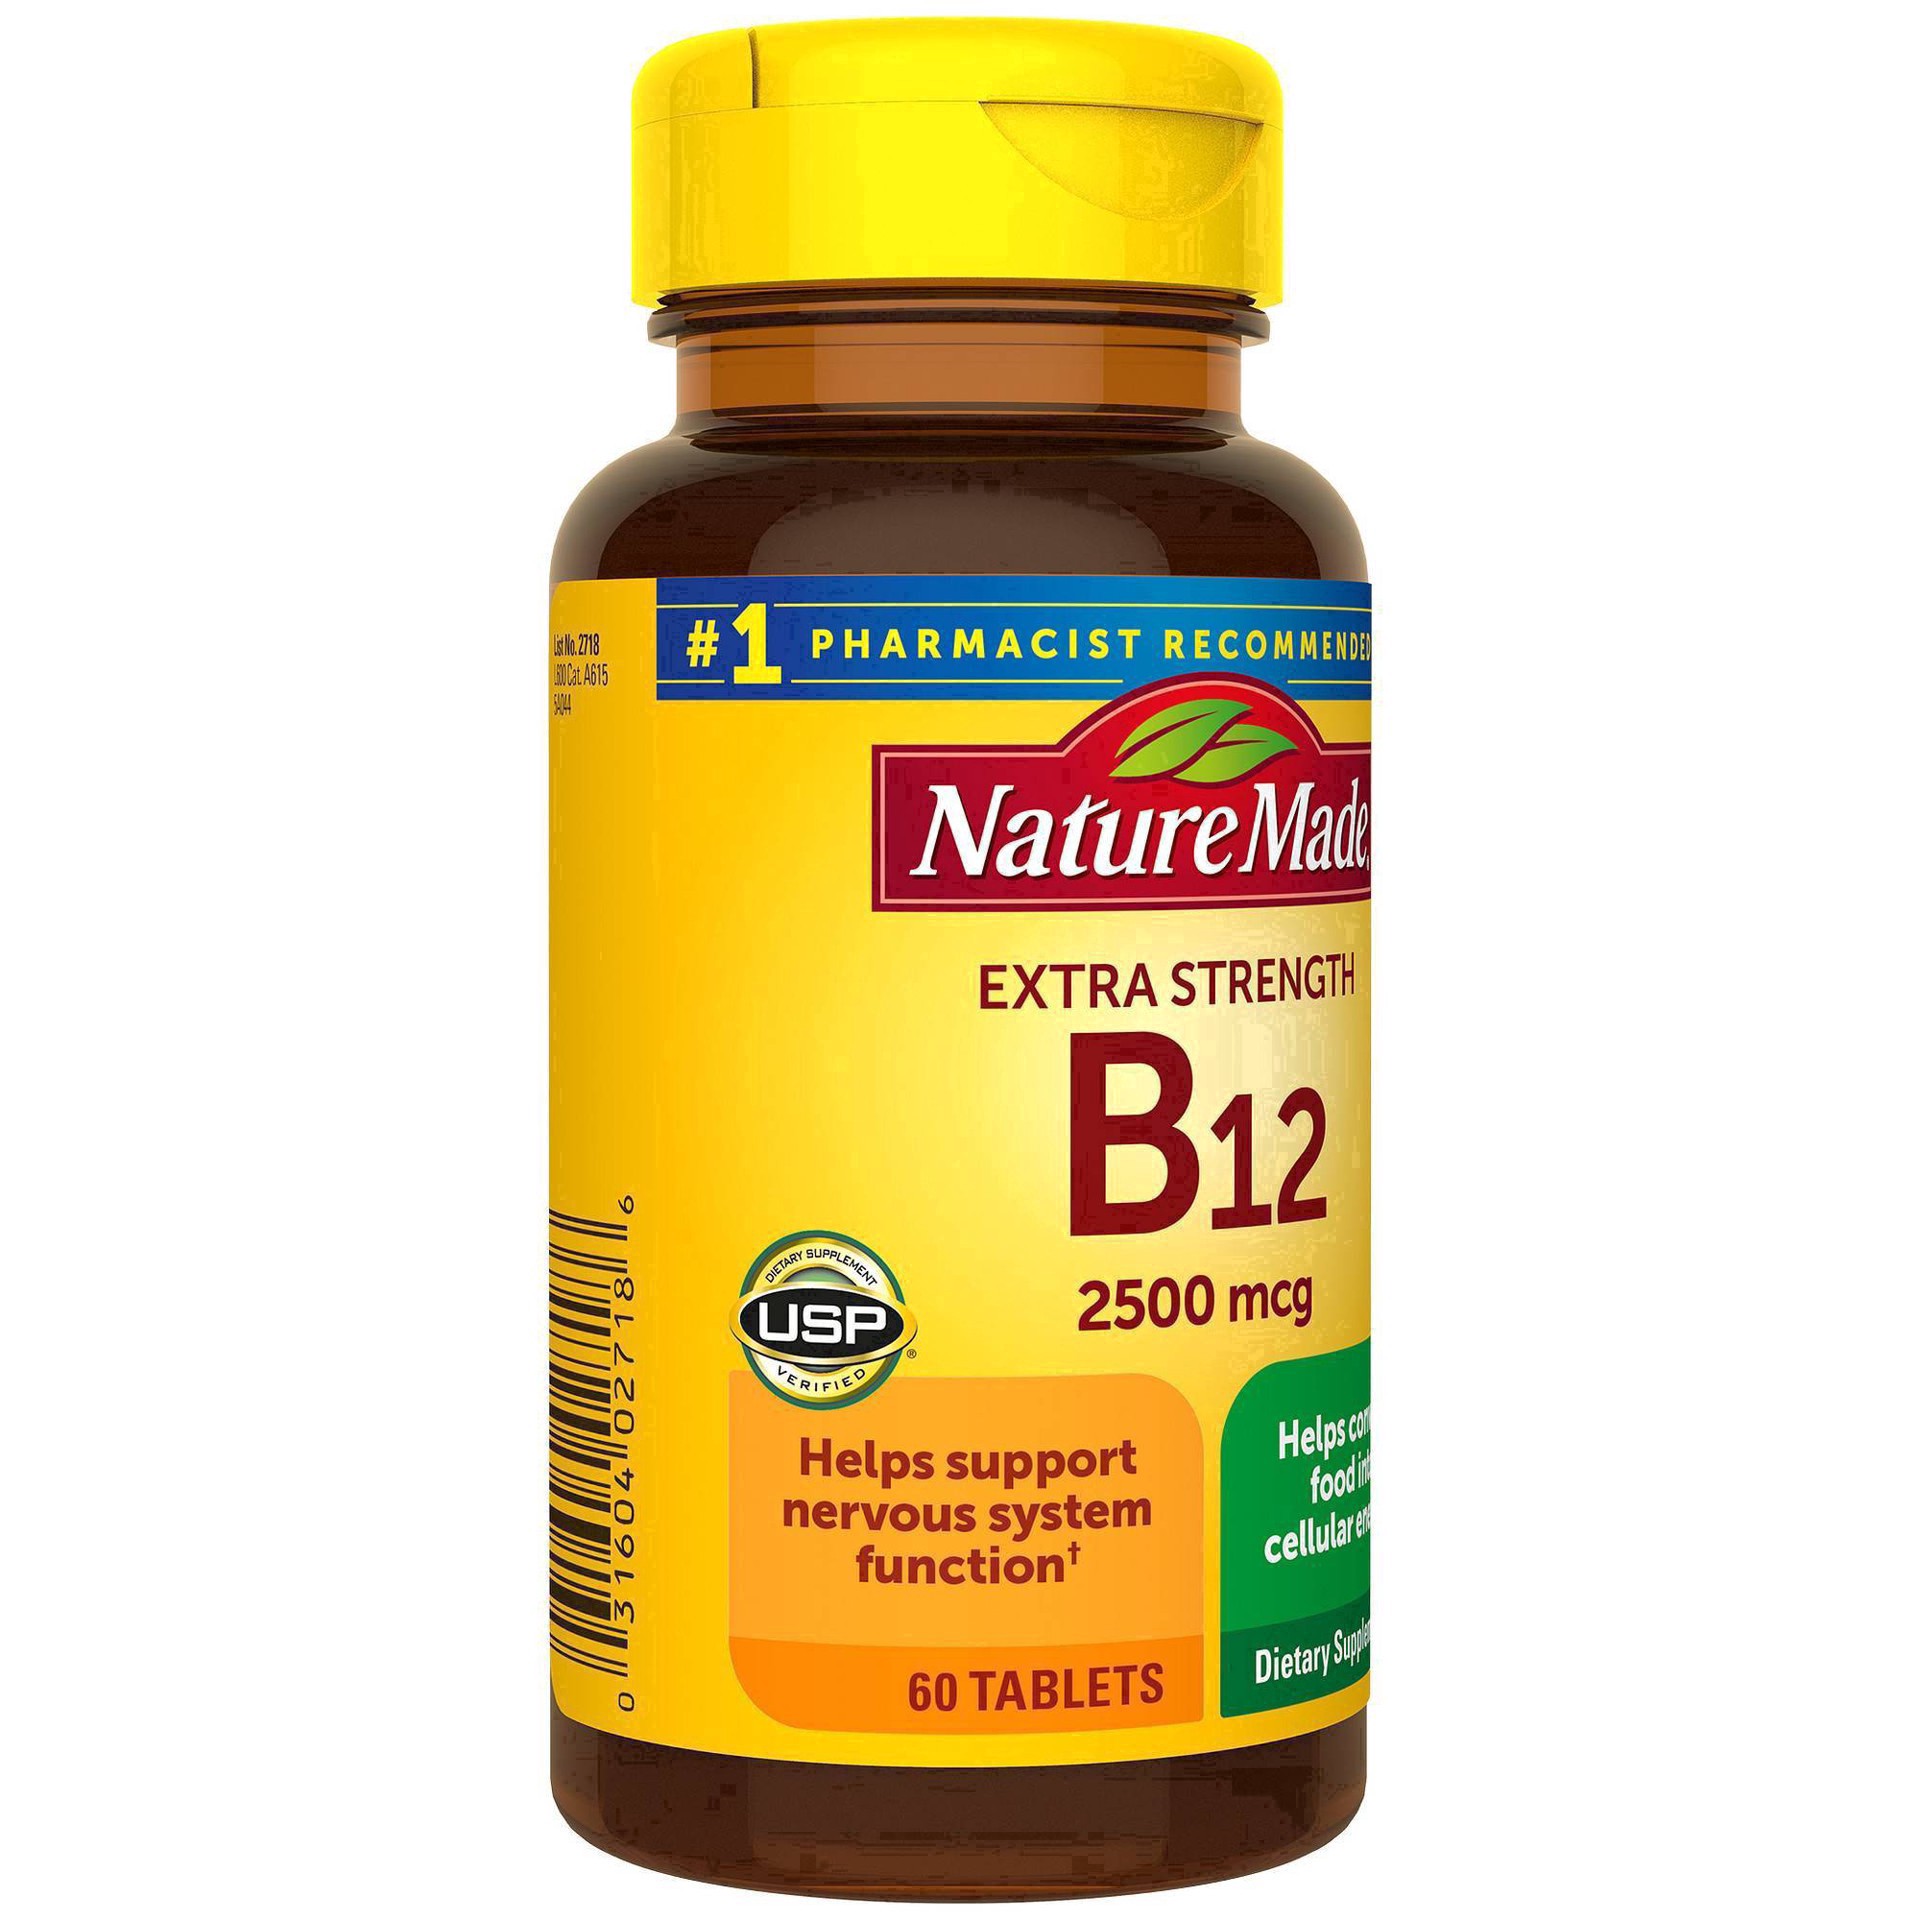 slide 28 of 60, Nature Made Extra Strength Vitamin B12 2500 mcg Tablets for Energy Metabolism Support - 60ct, 60 ct